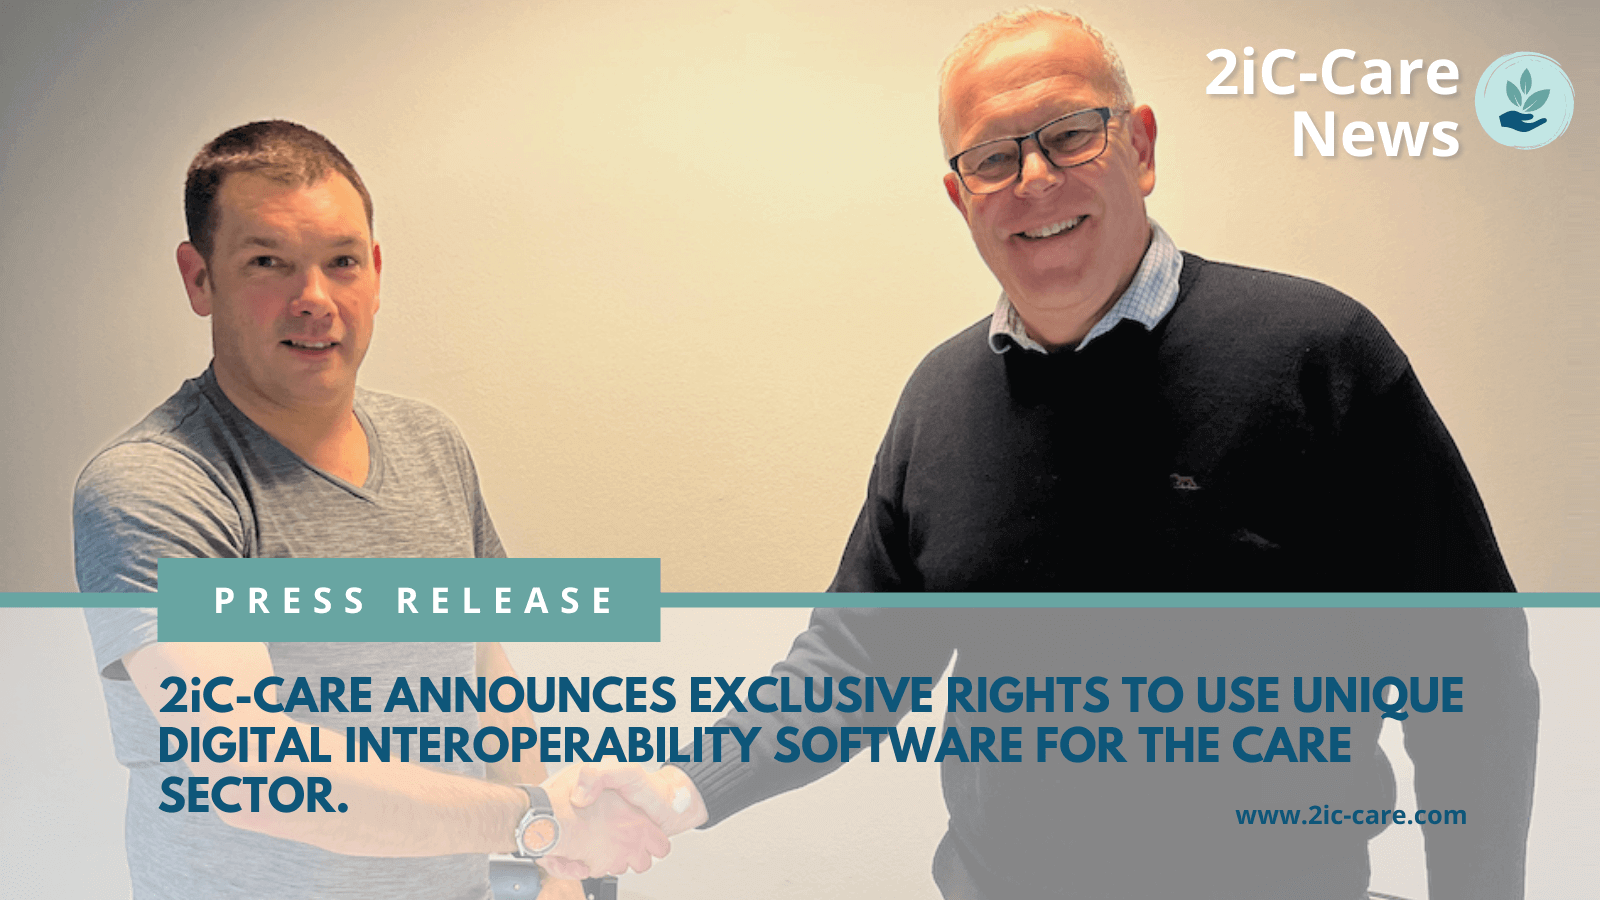 2iC-Care Announces Exclusive Rights to Use Unique Digital Interoperability Software - Press Release, February 2022